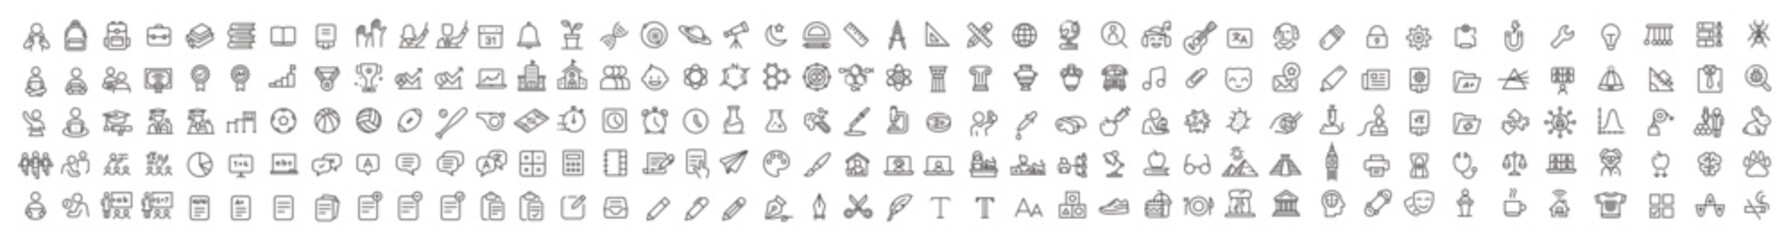 50 editable vector icons for school and university themes. perfect for designers, educators, and stu